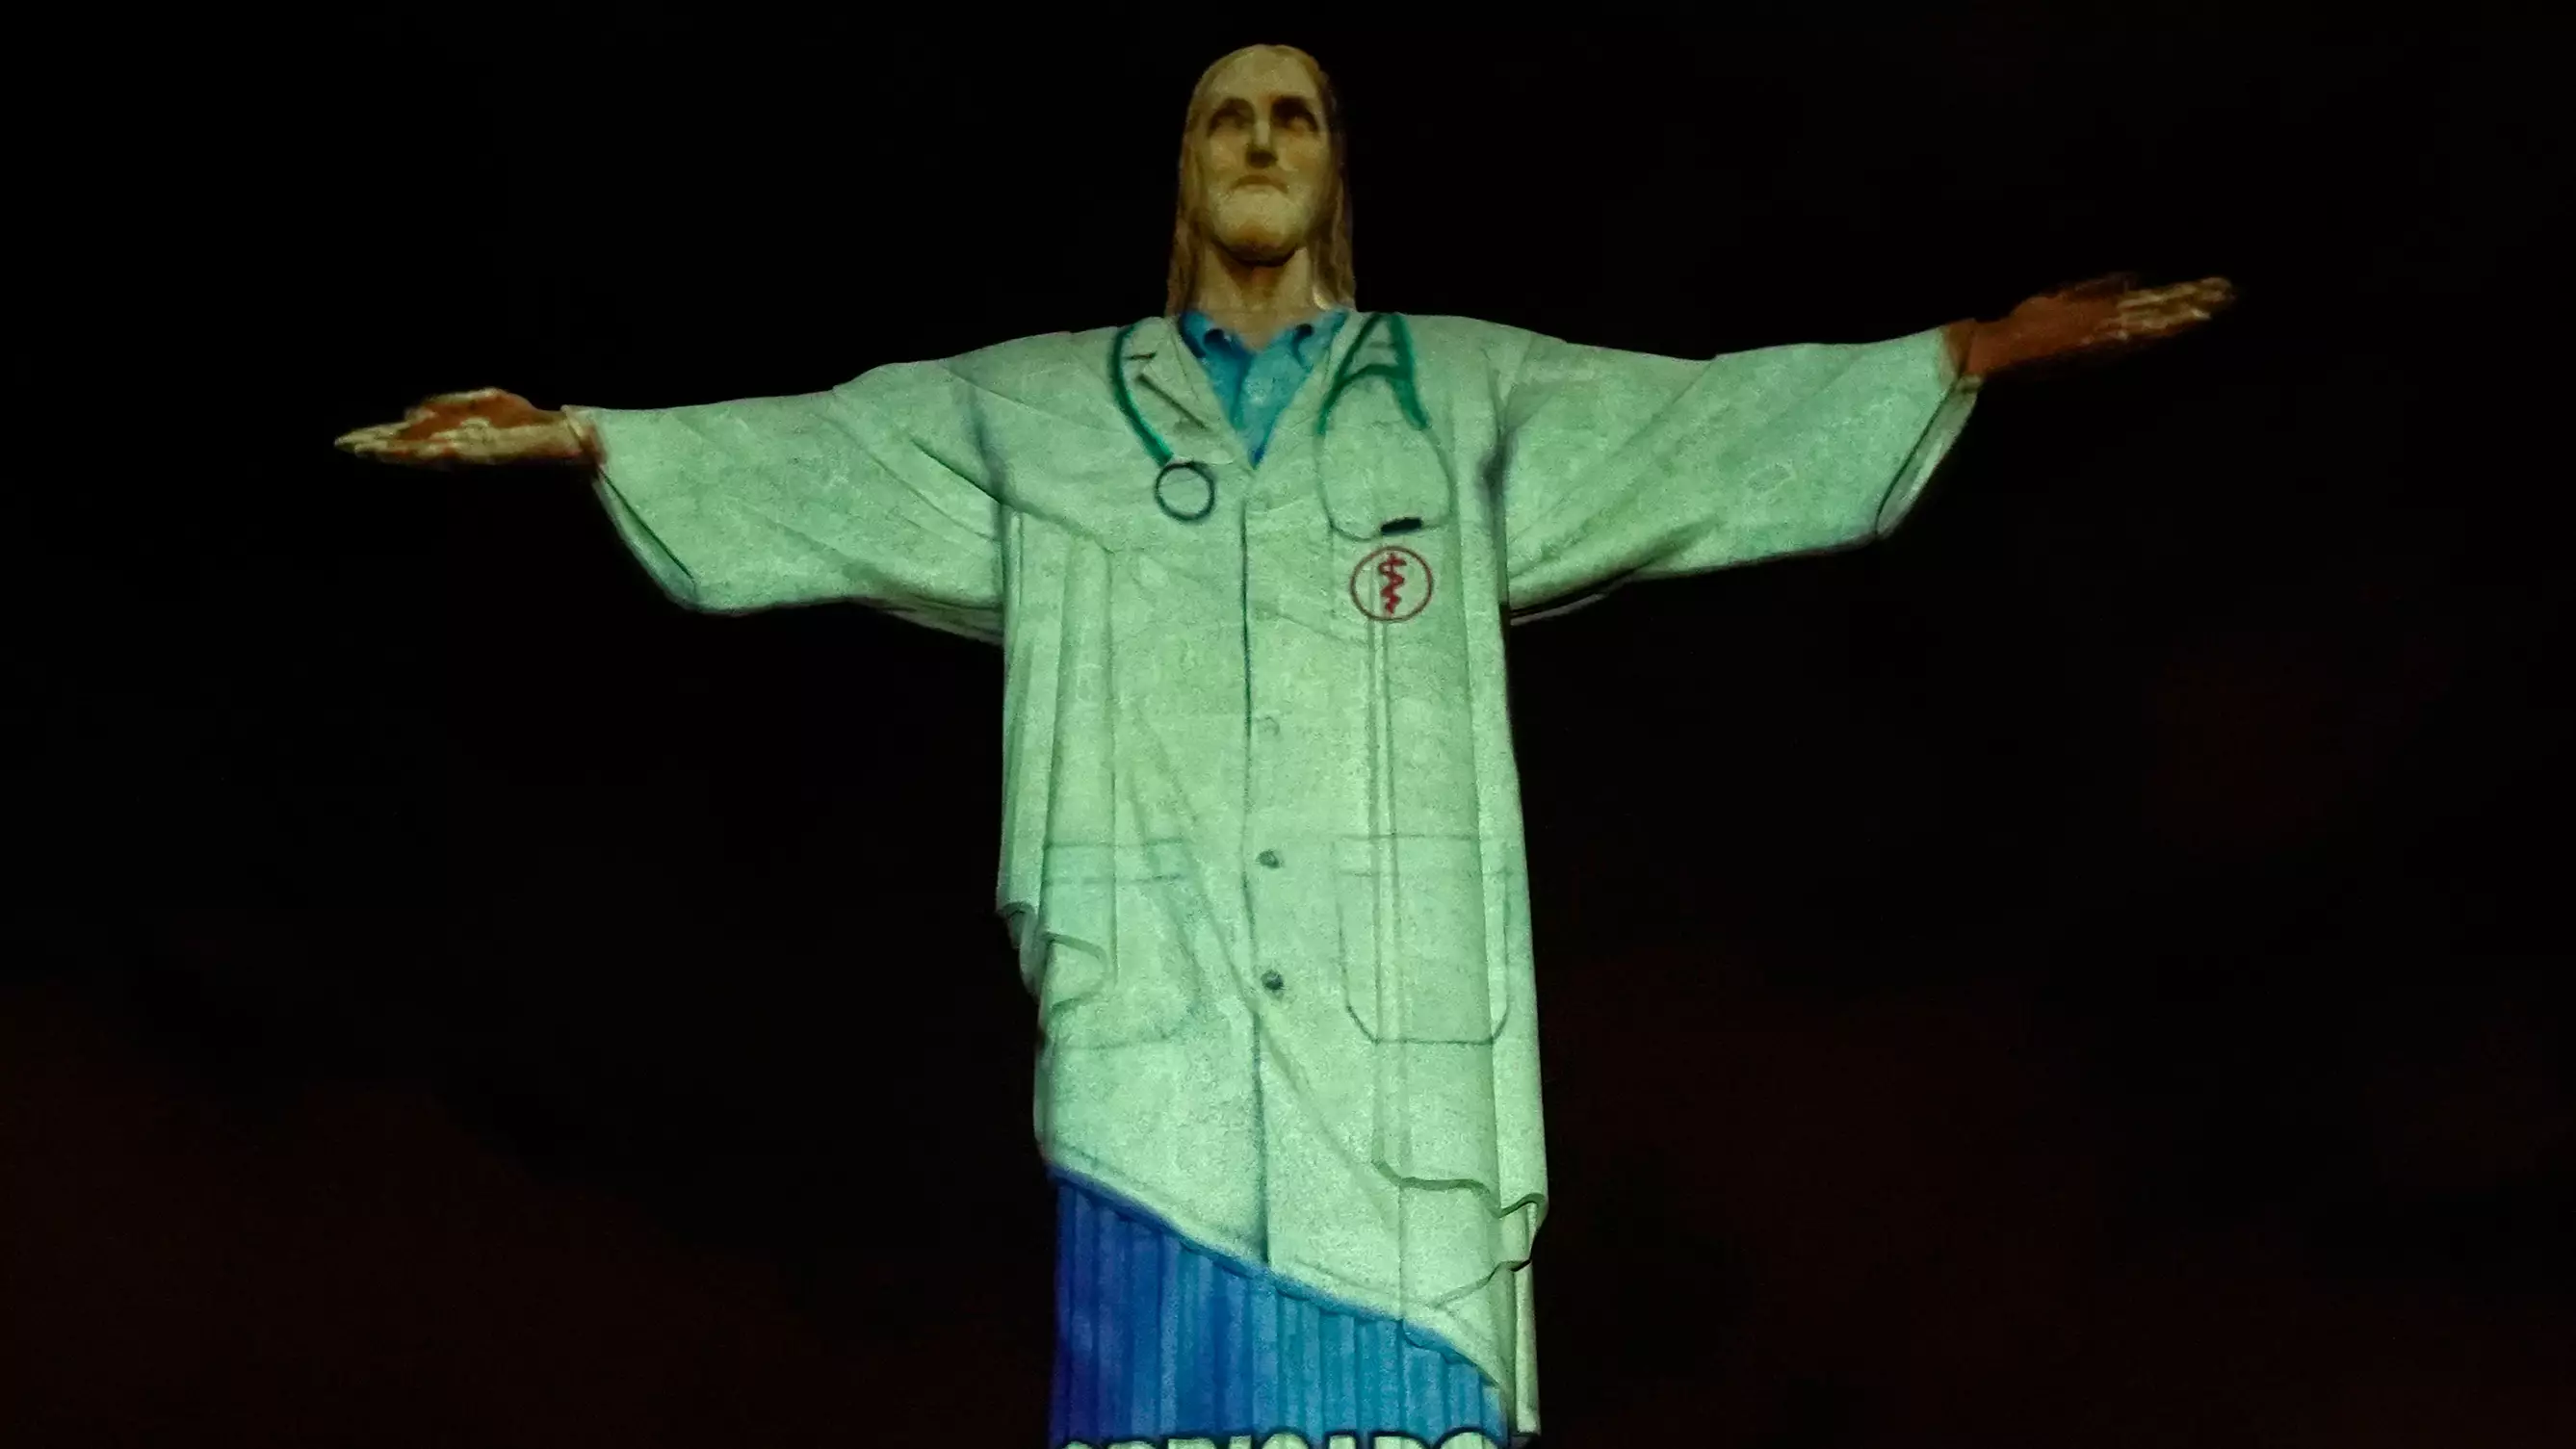 Christ The Redeemer Lit Up As A Doctor With Message Of Thanks During Coronavirus Pandemic